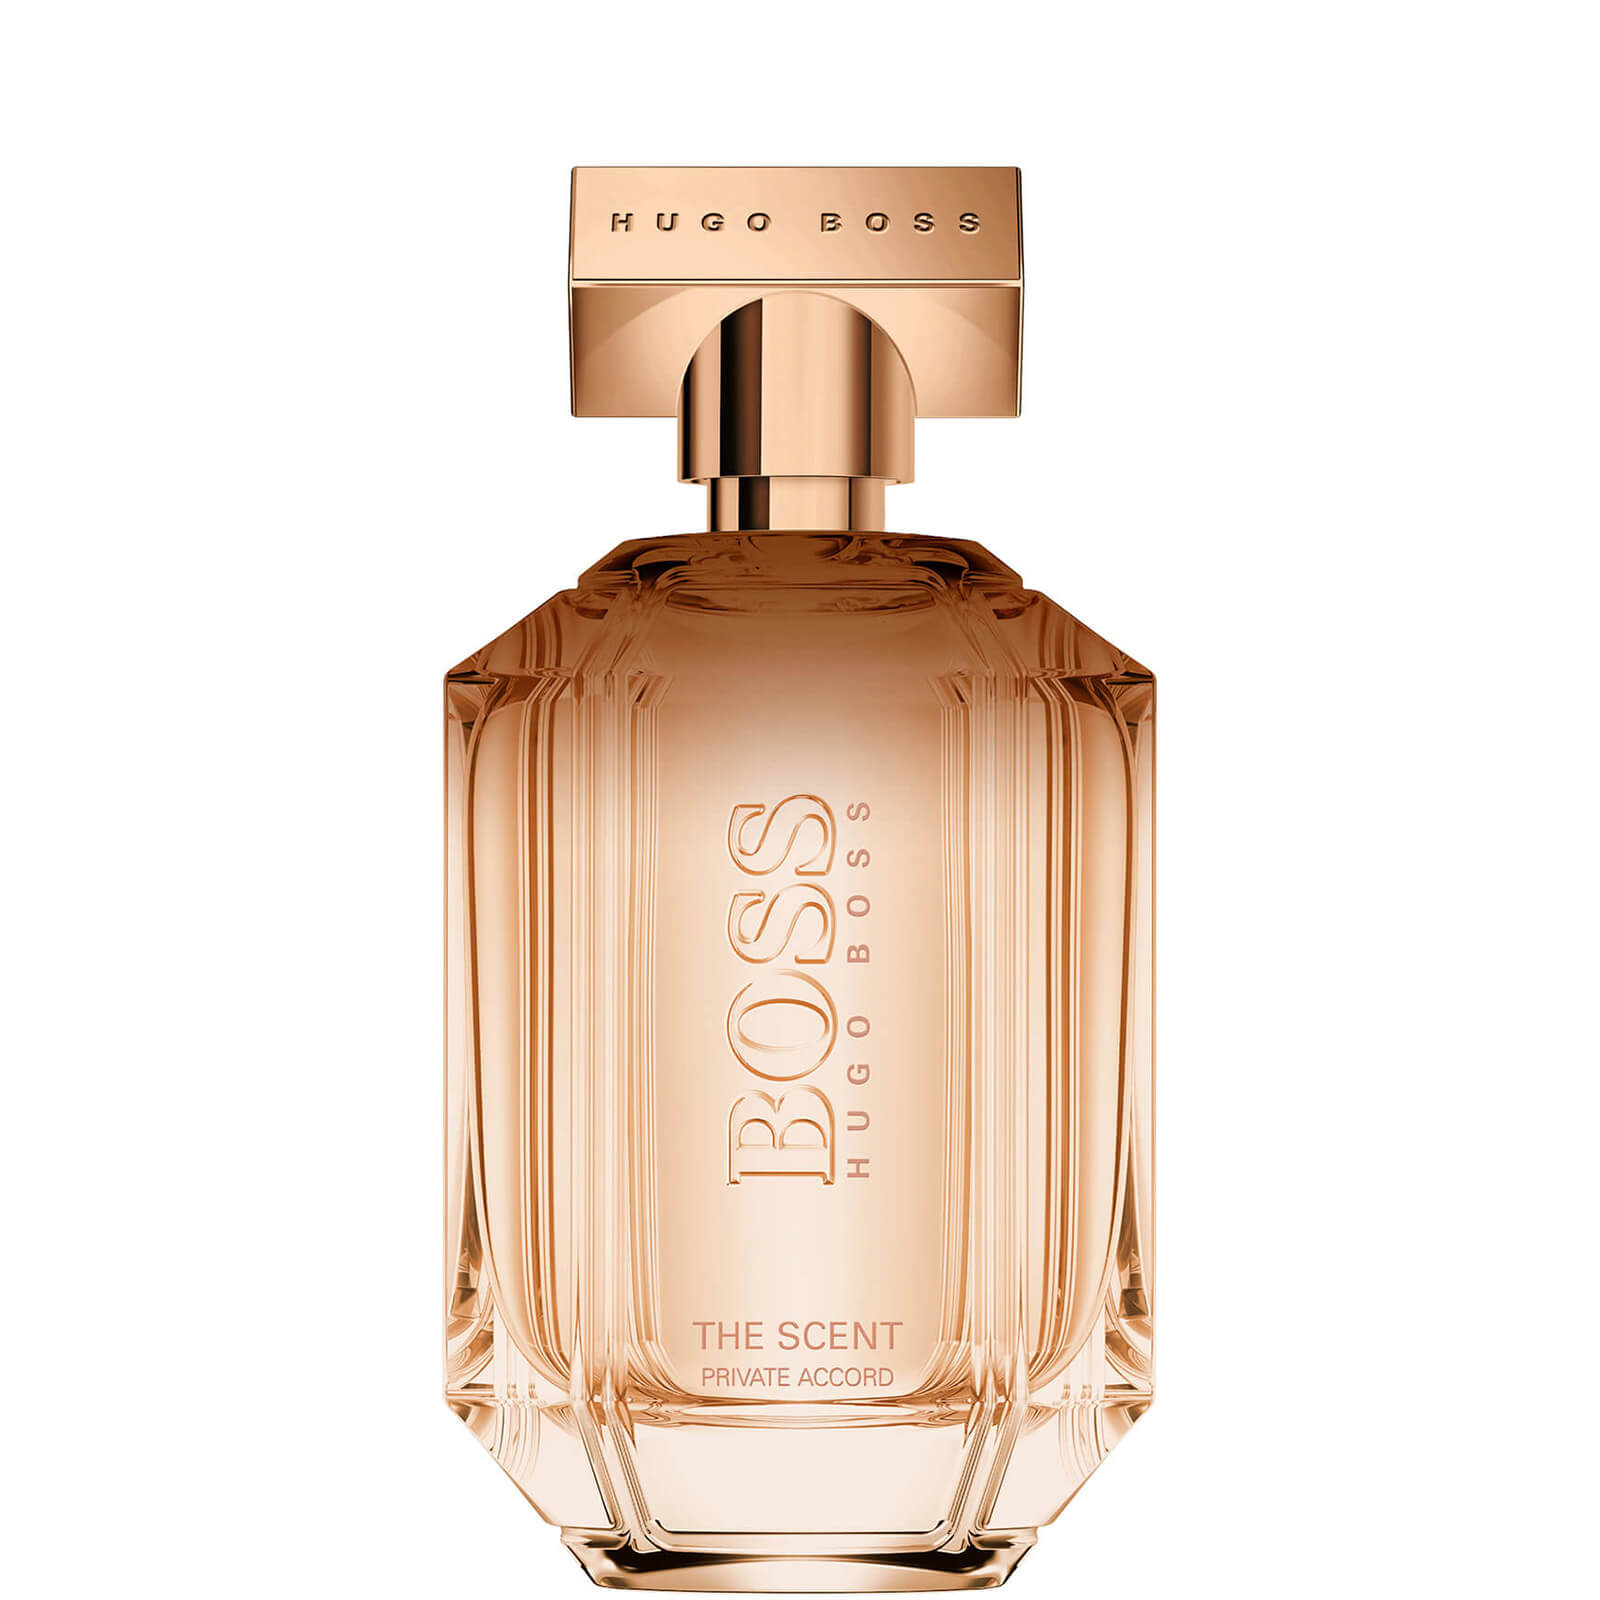 Hugo Boss boss scent private accord for her, 100 ml